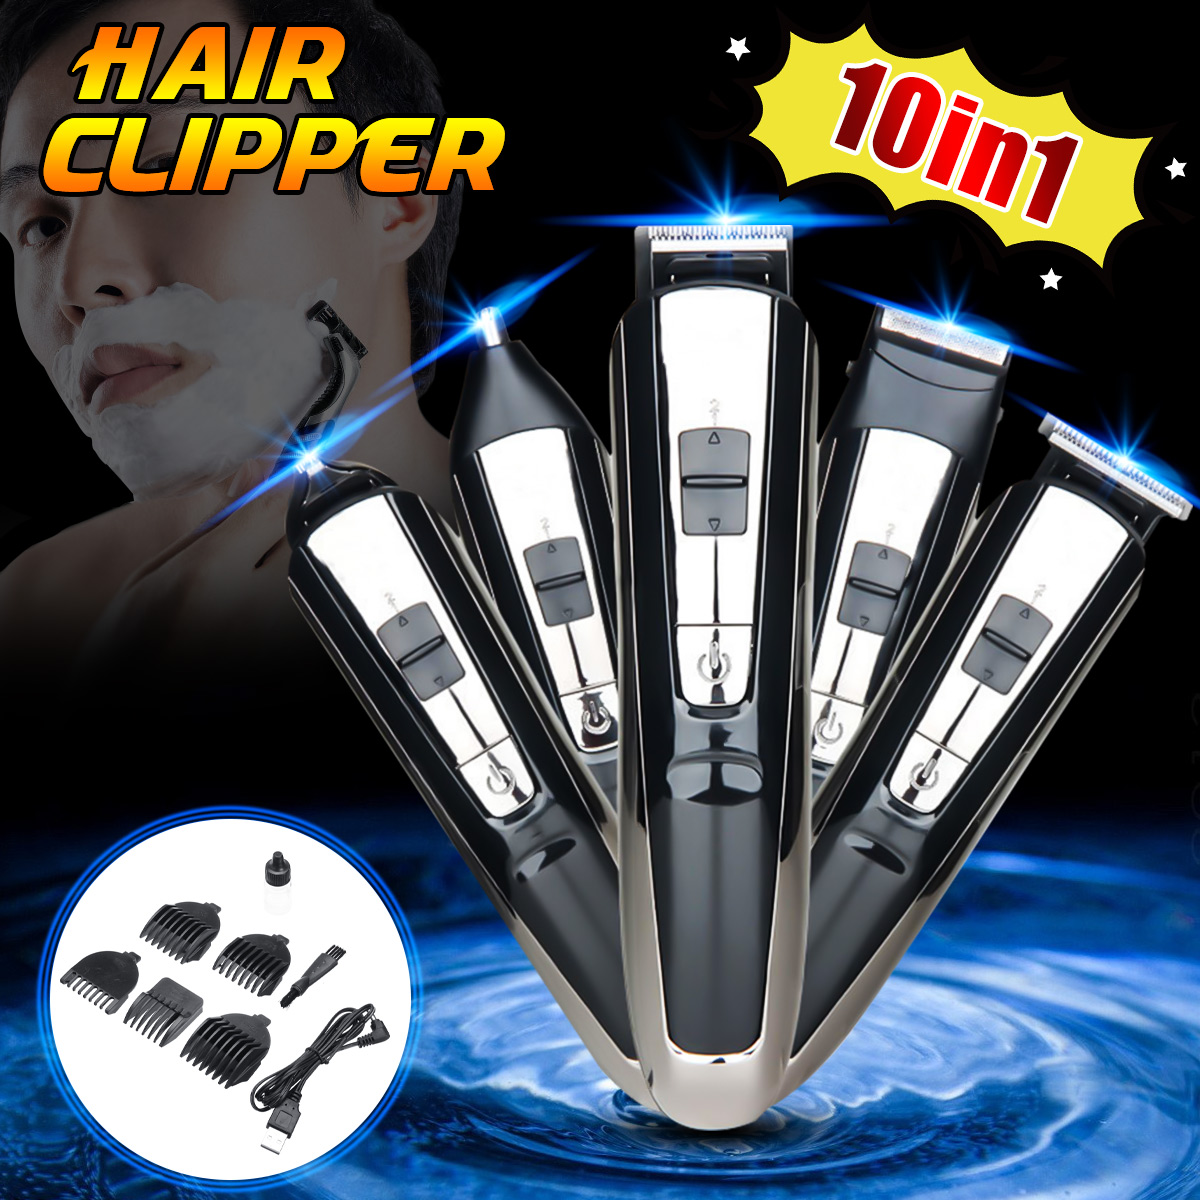 10 in 1 Multi-function Hiar Clipper Nose Hair Trimmer Shaver Angle Cutter